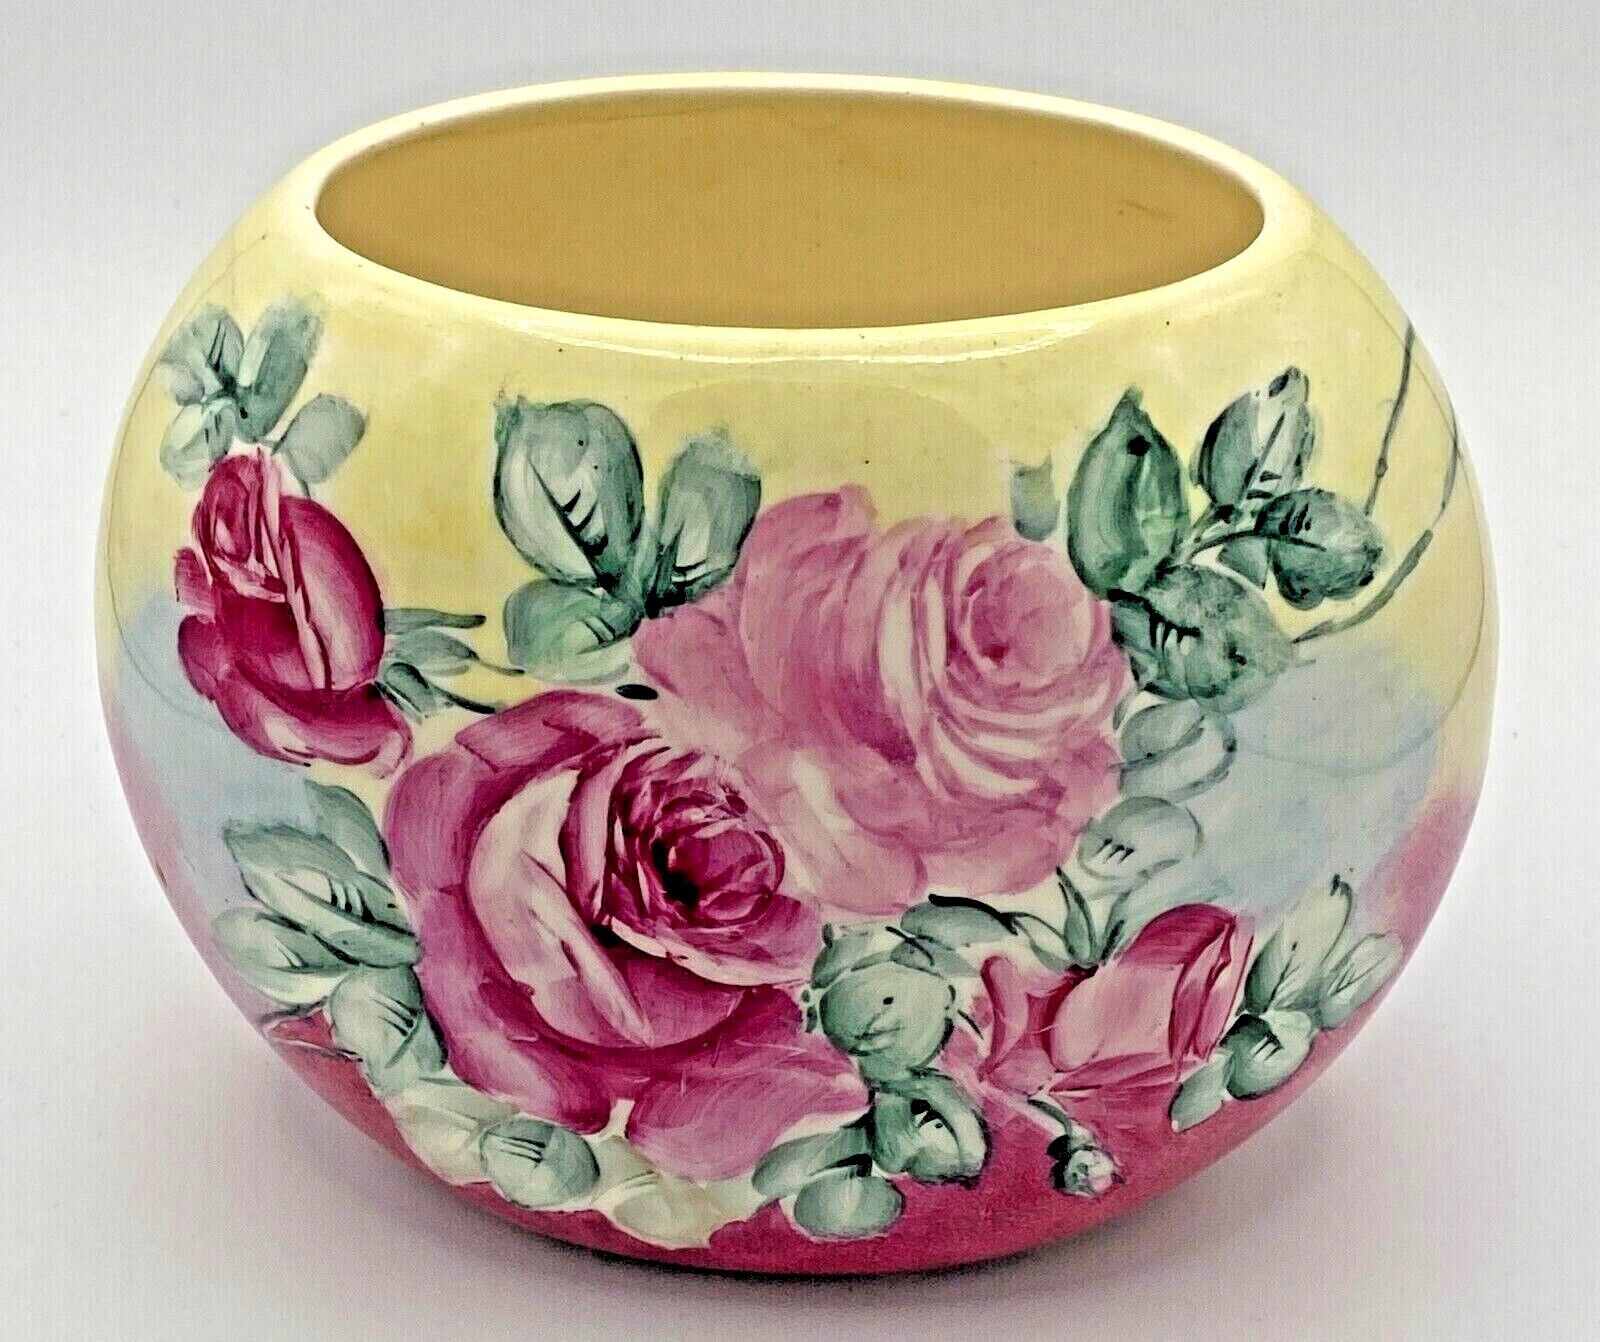 Pink Floral Flower Ceramic Vase Hand Painted Flowers Oval Round